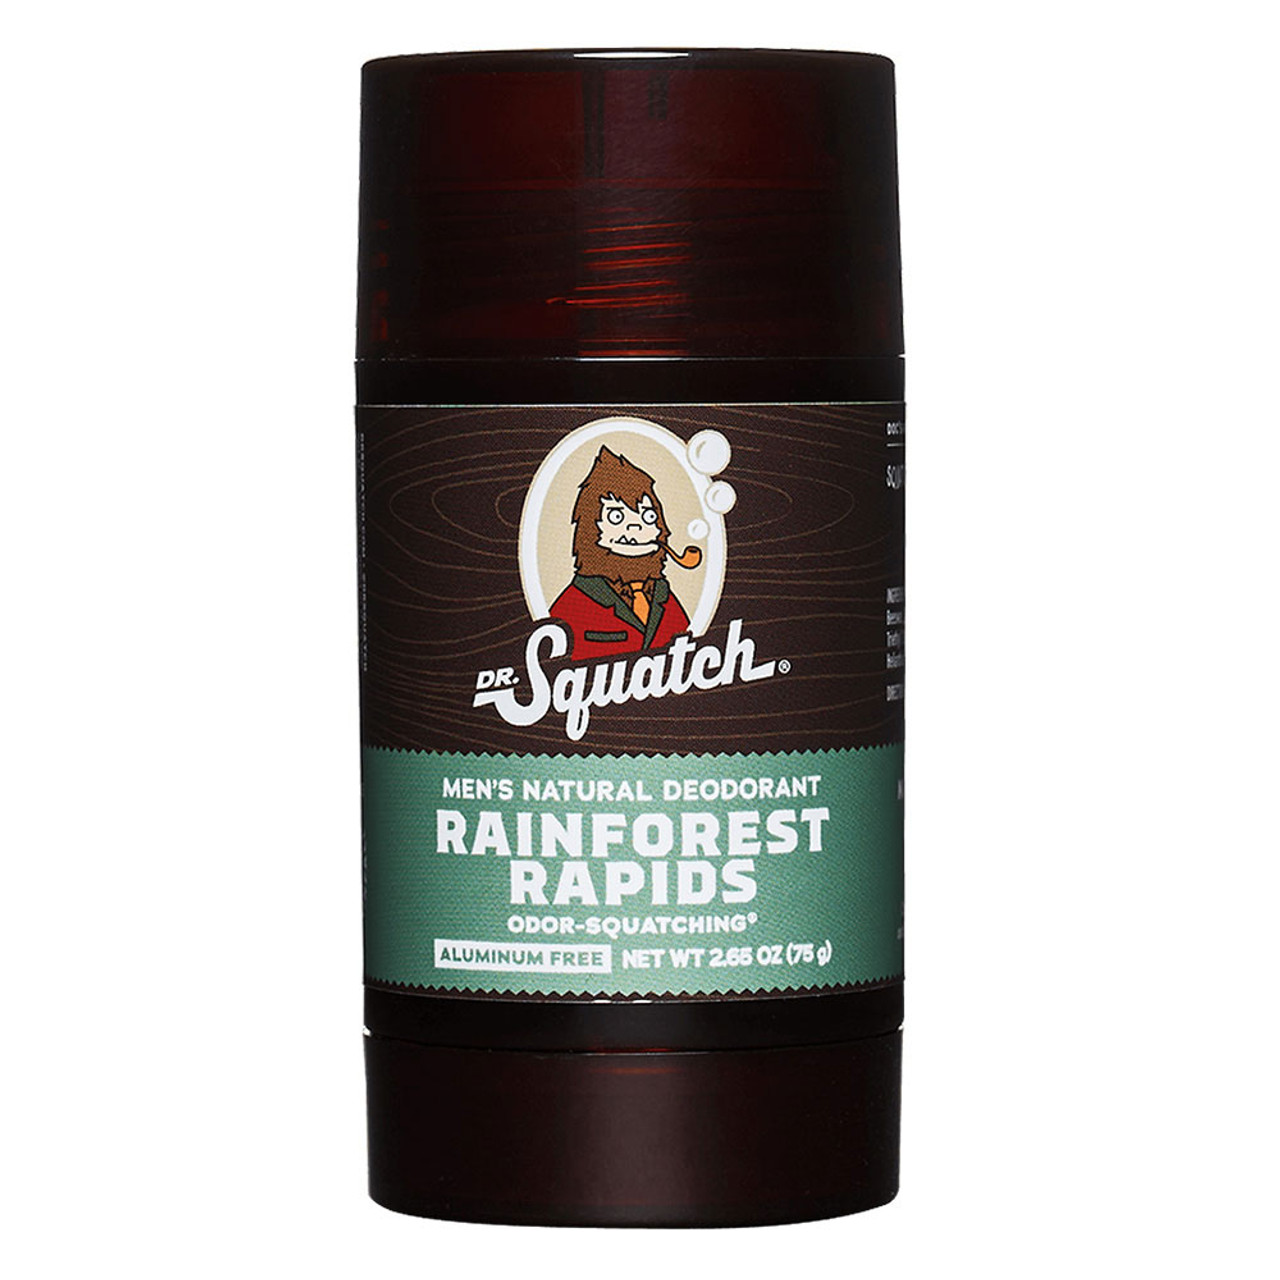 Dr. Squatch Deodorant - Send to Mount Gilead, OH Today!